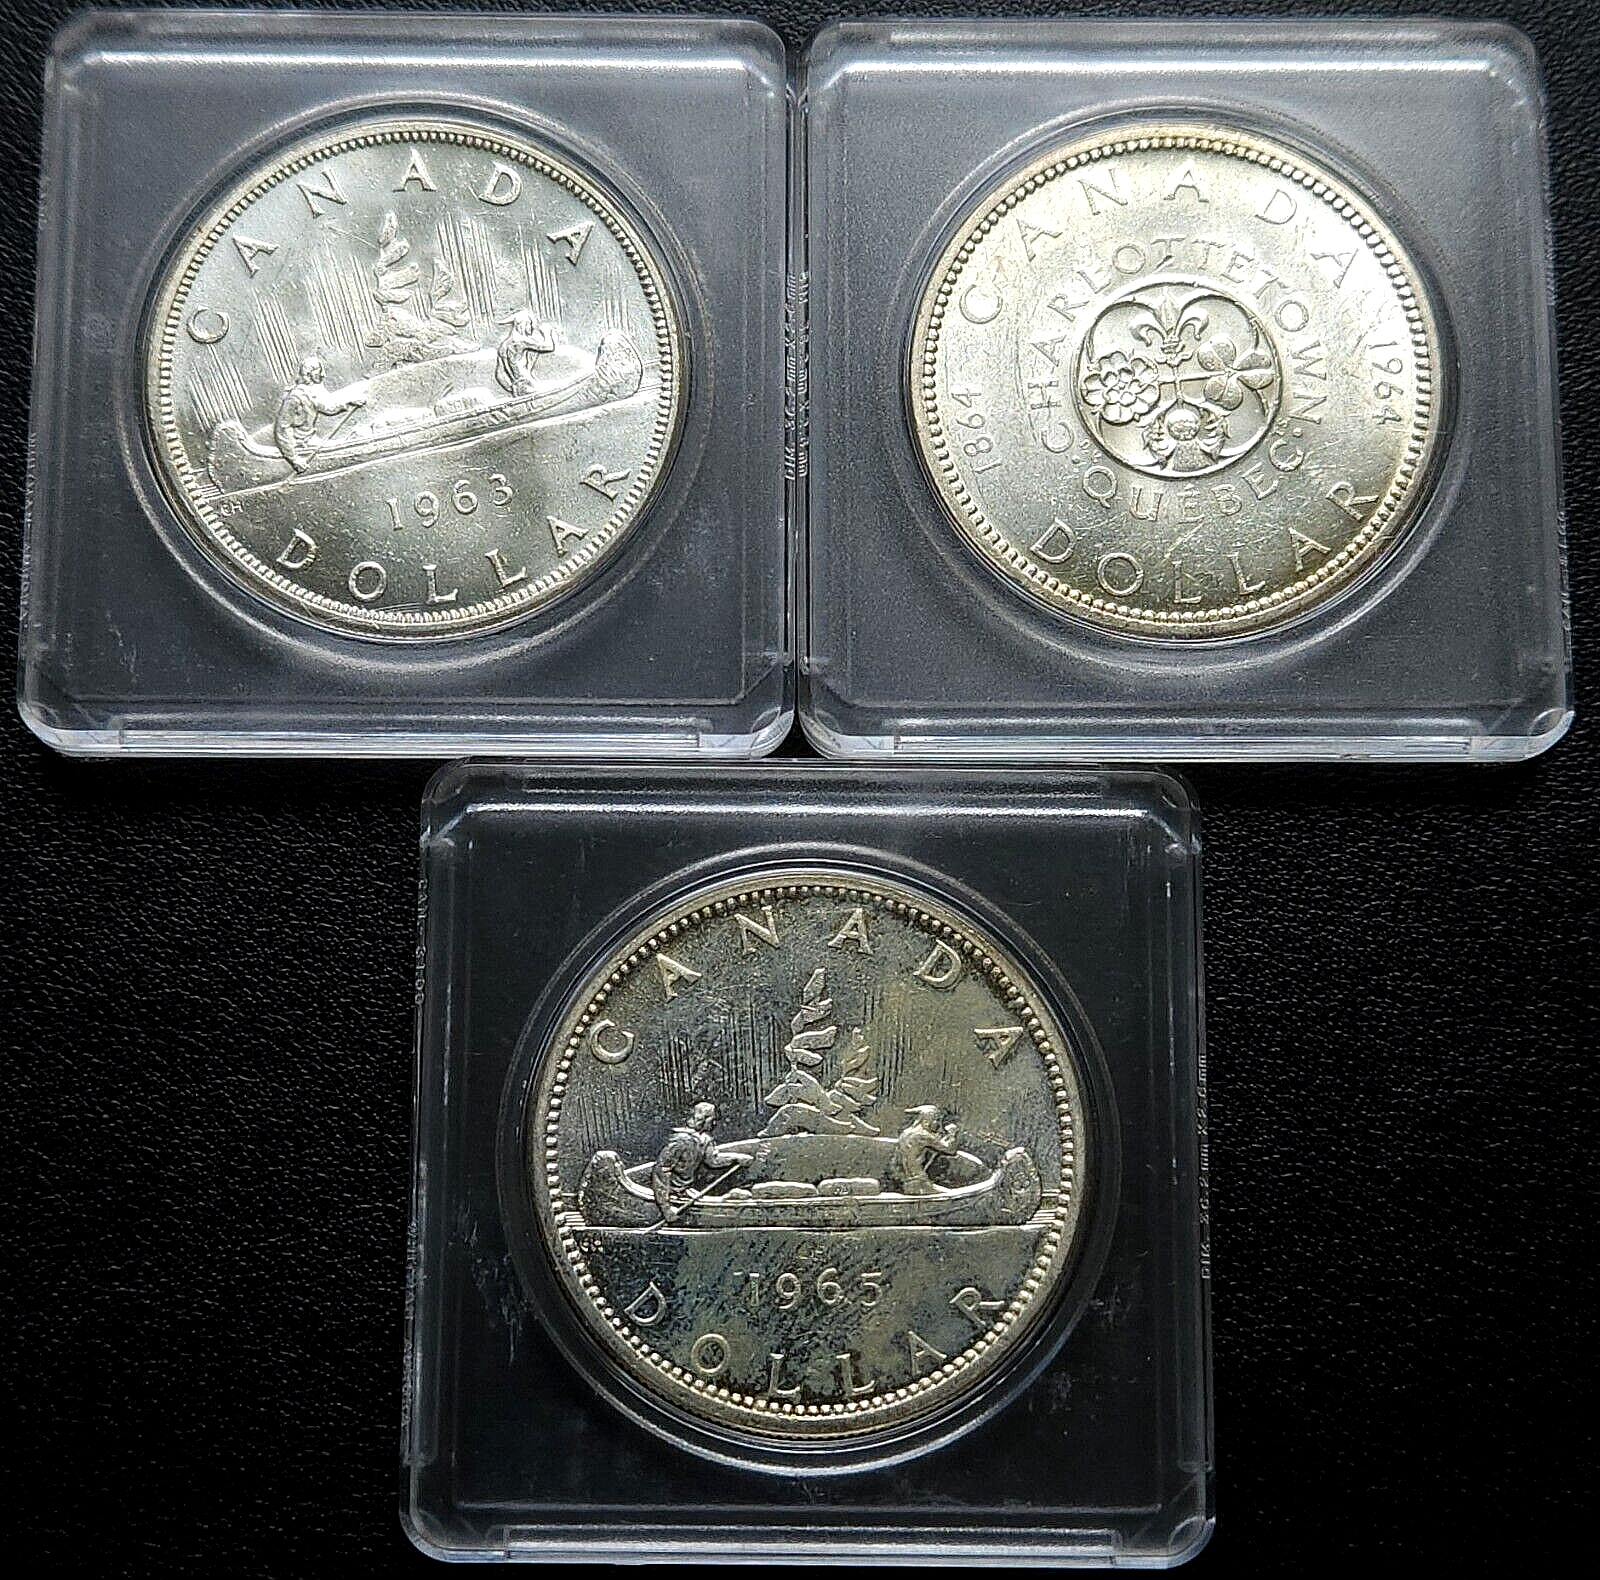 1963, 1964, 1965 Canada Silver $1 Dollar Coins - Great Condition All In Capsules